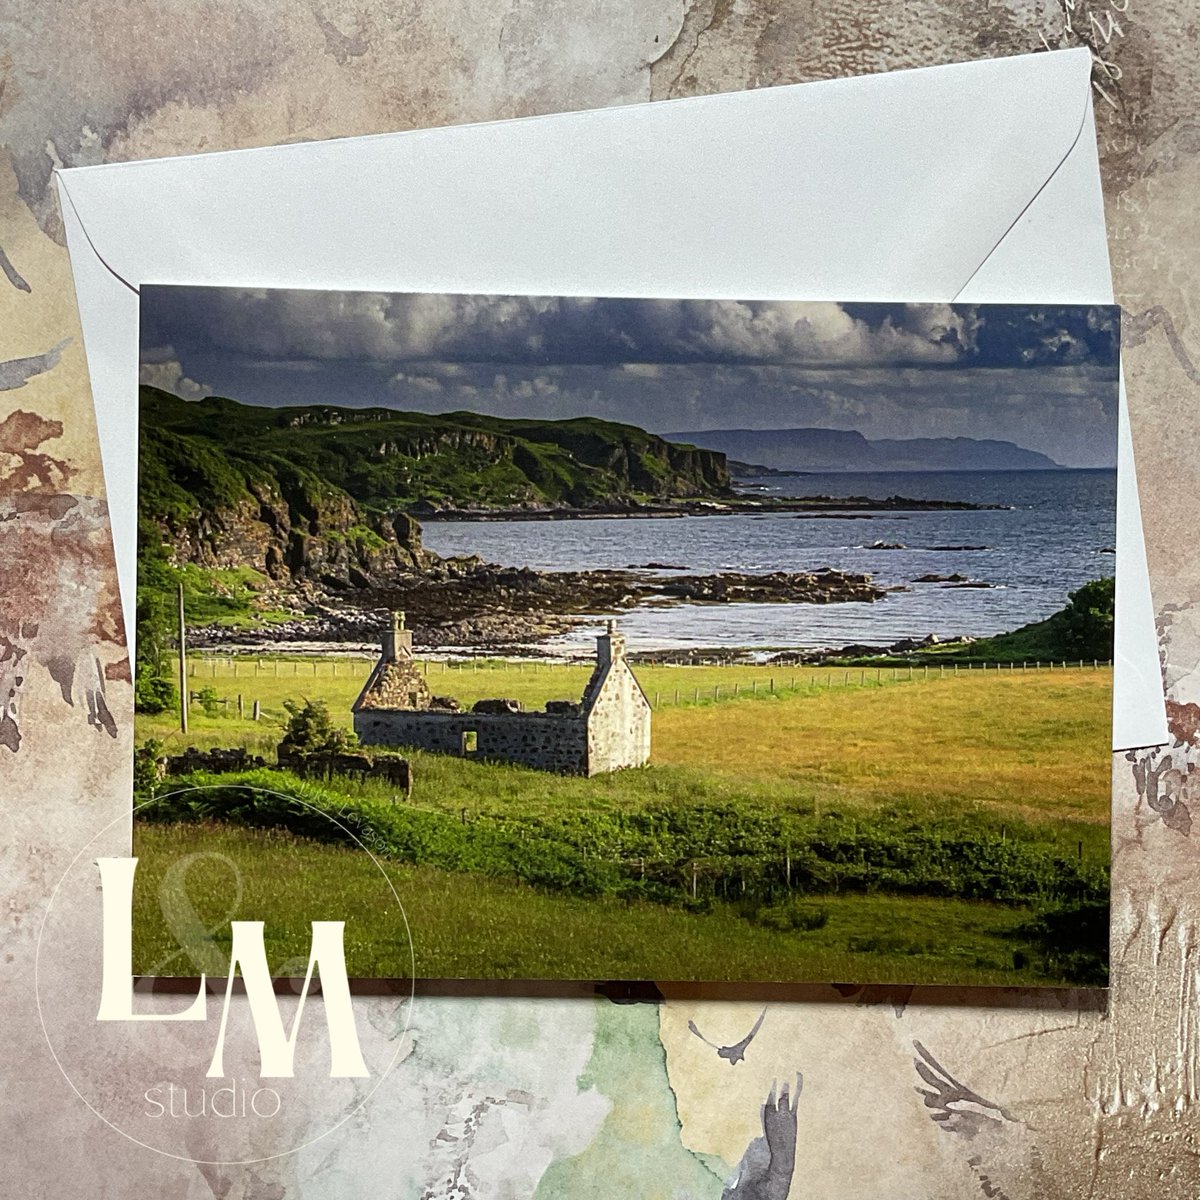 DESERTED COTTAGE We don’t know about you, but we could live here (with a roof of course)! Taken on our holiday to Scotland last year, now available on a blank greetings card, we’ll pop the link below. #thelandmstudio #andymorrisphotography #greetingscard #PhotographyIsArt